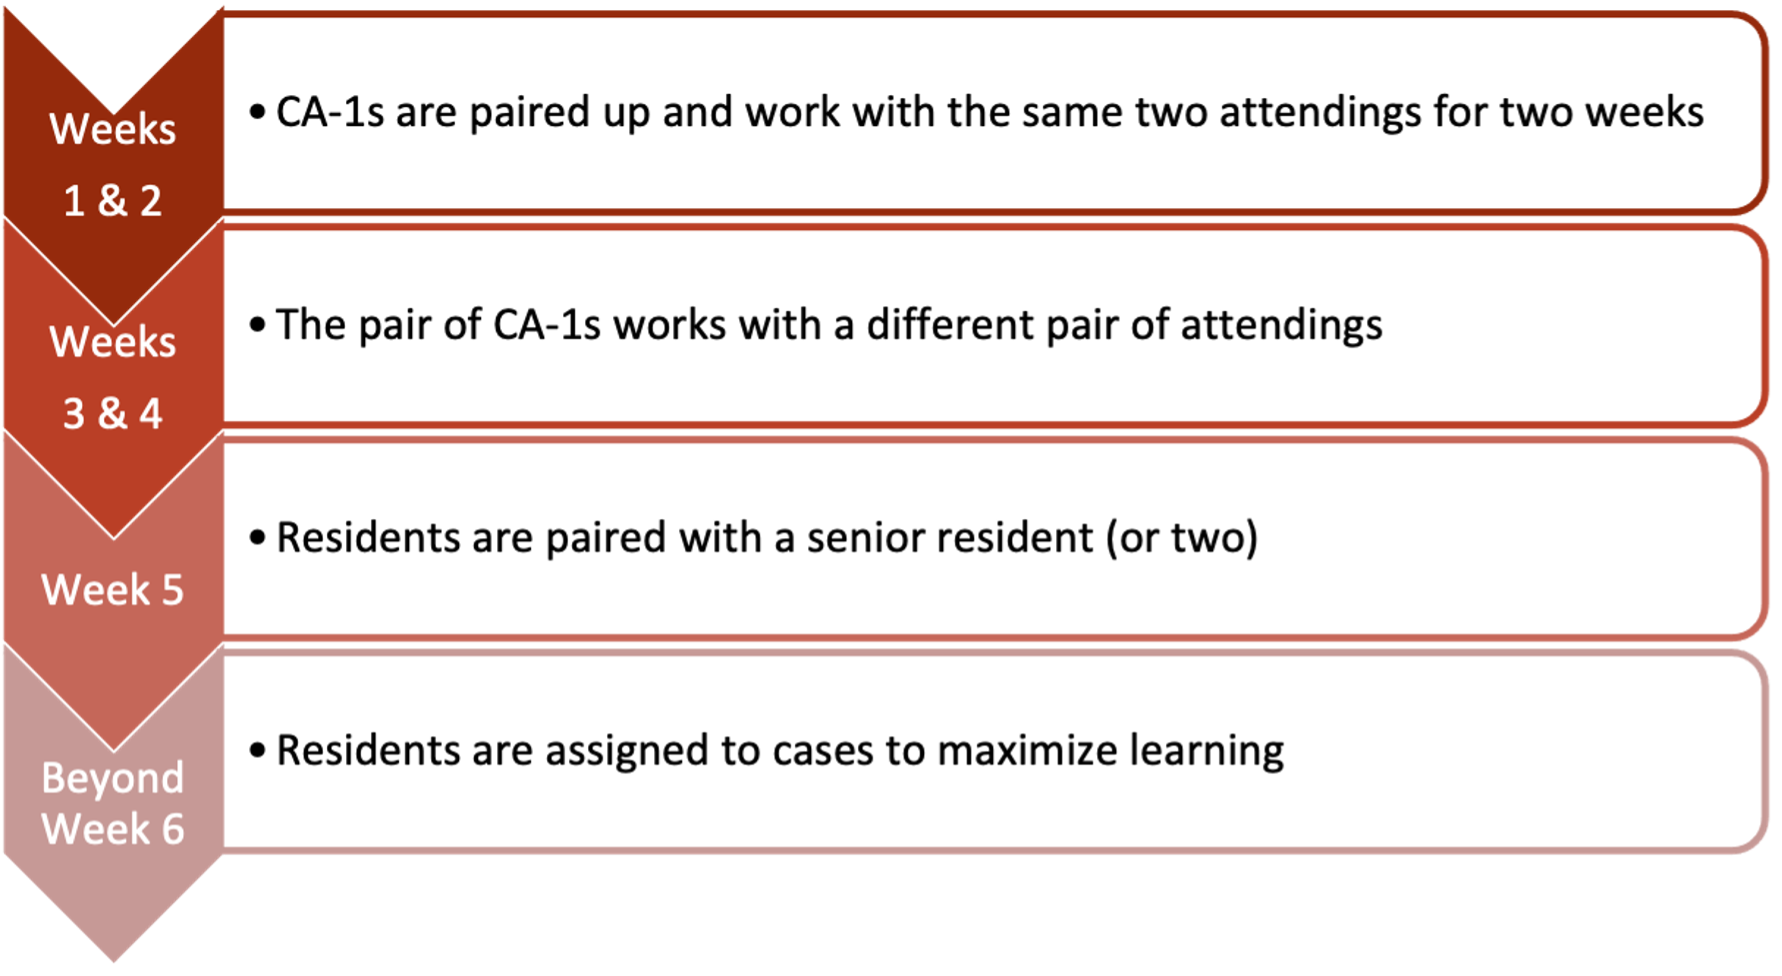 Orientation to the Operating Room Chart.  Weeks 1 & 2: CA-1s are paired up and work with the same two attendings for two weeks.  Weeks 3 & 4: The pair of CA-1s works with a different pair of attendings.  Week 5: Residents are paired with a senior resident (or two).  Beyond Week 6: Residents are assigned to cases to maximize learning.